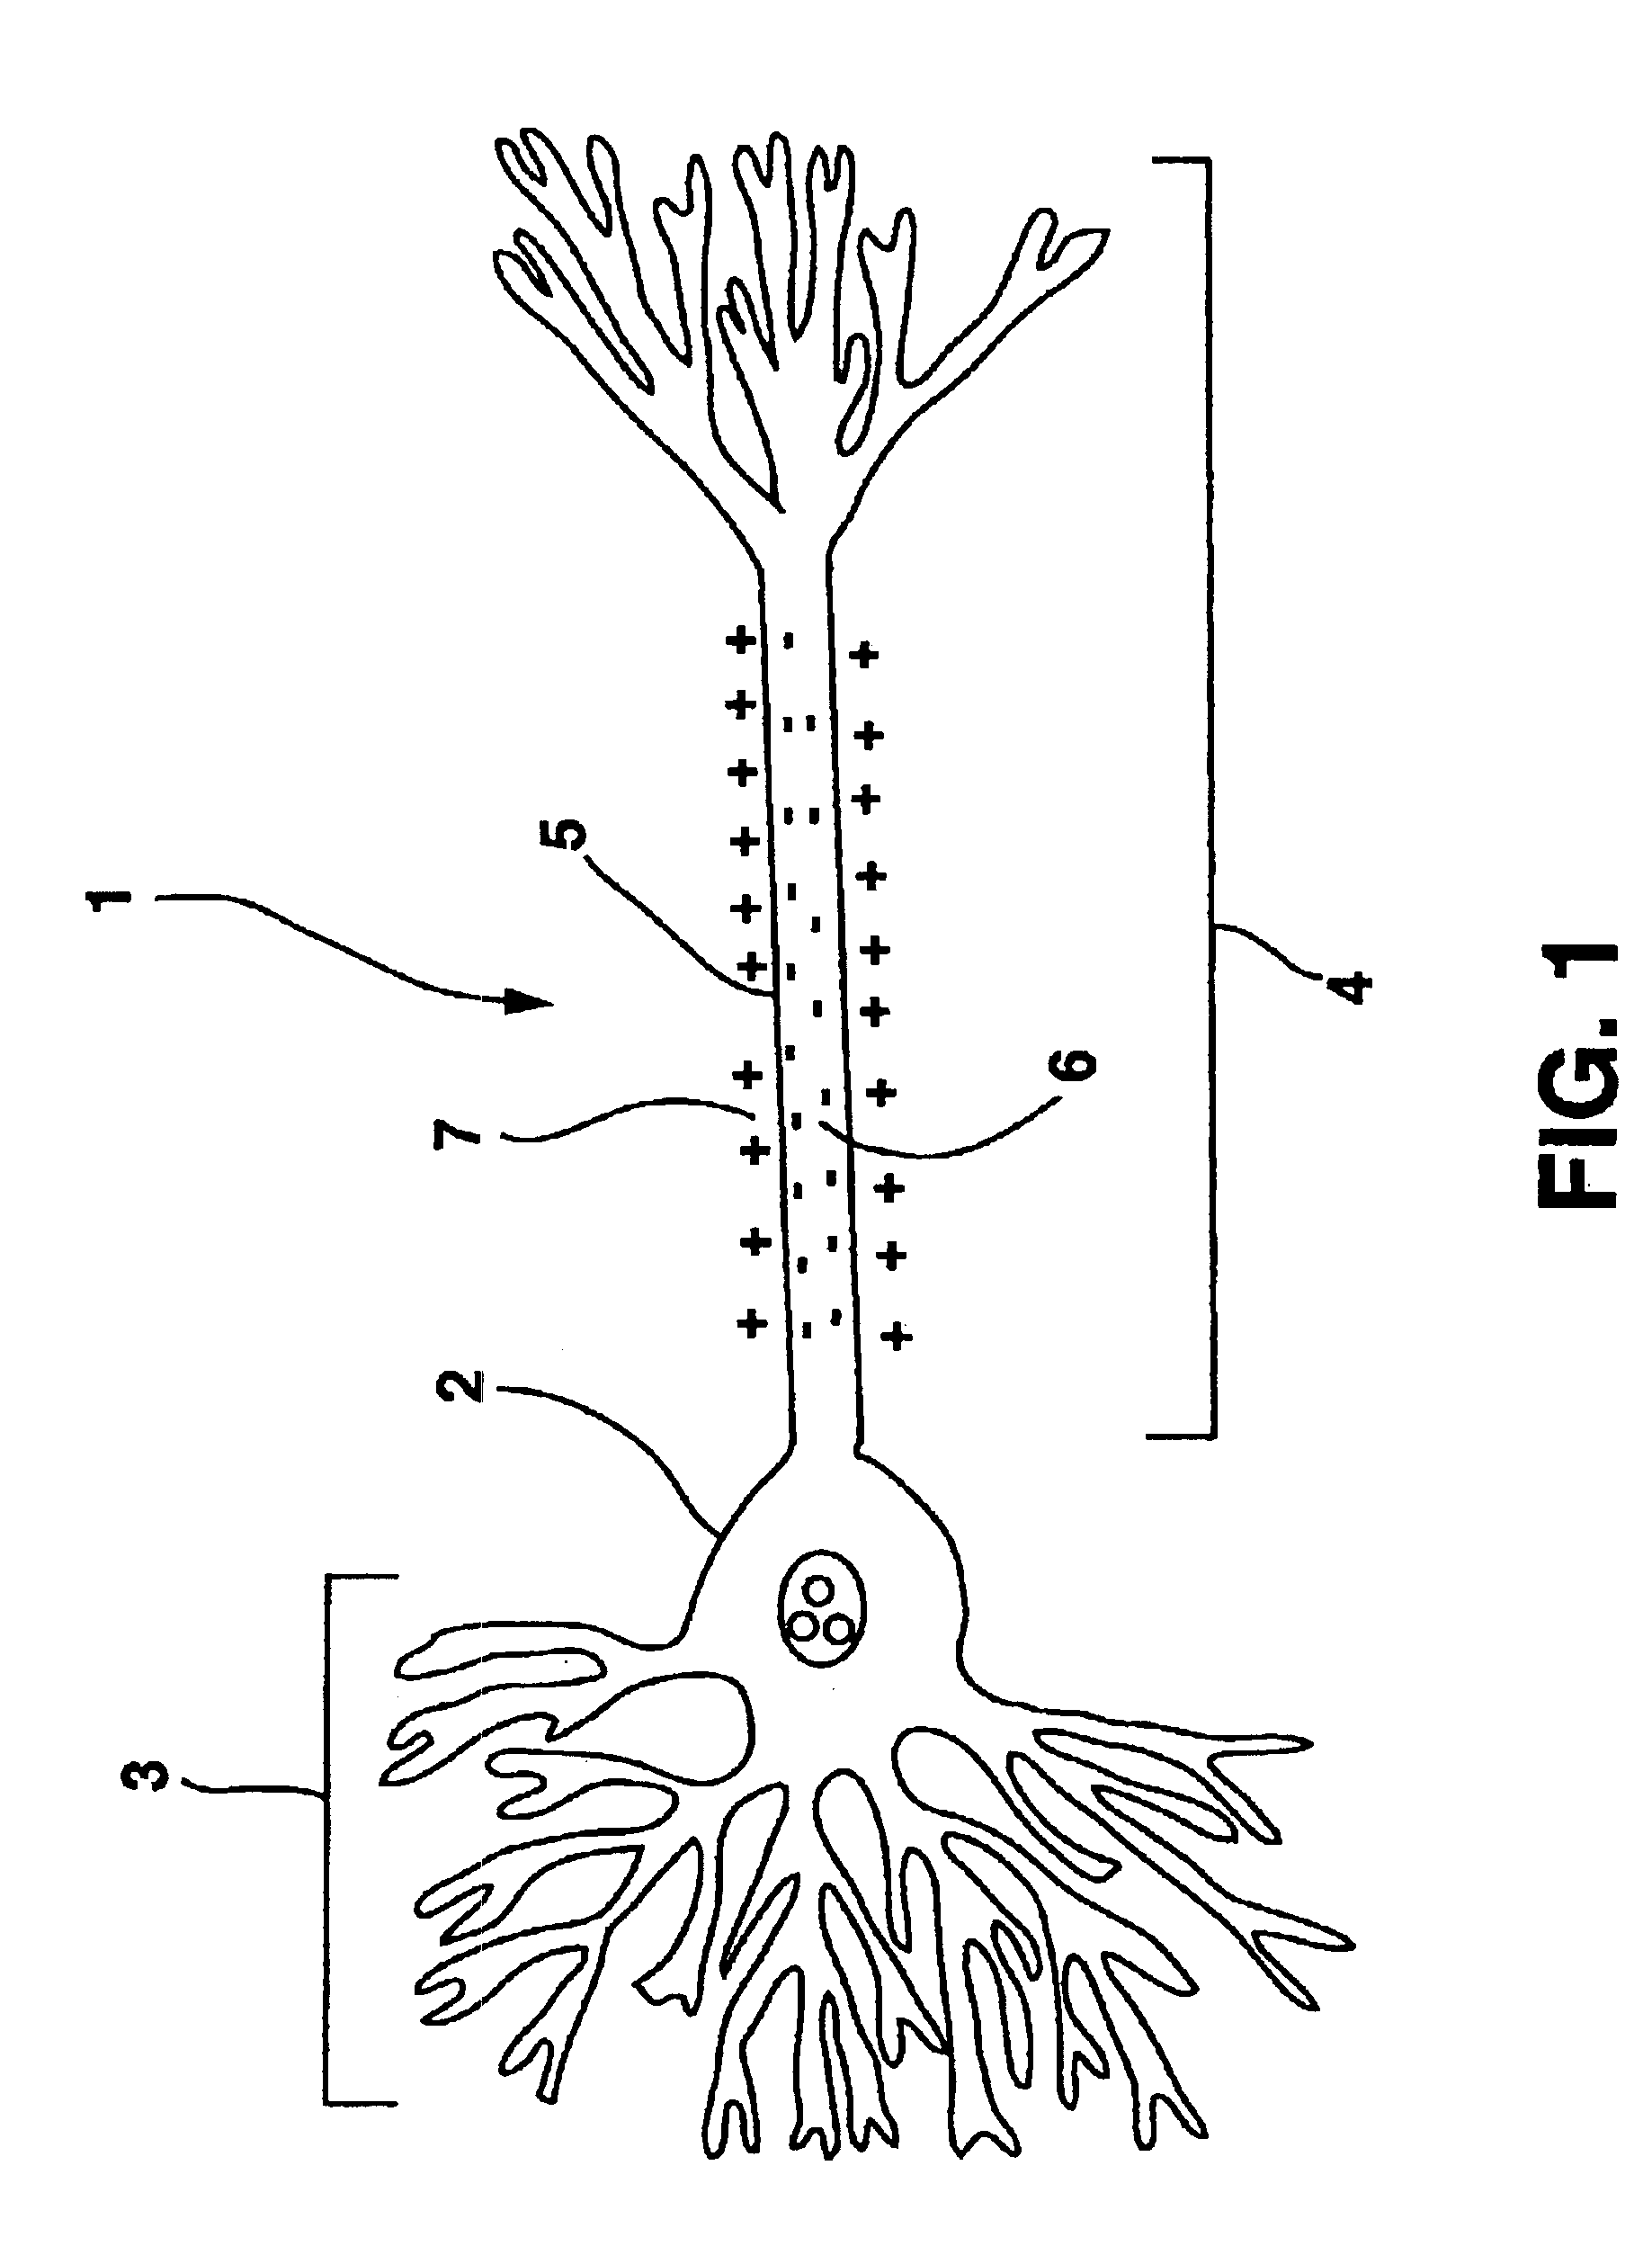 Method of preparing neural tissue of the brain for subsequent electrical stimulation